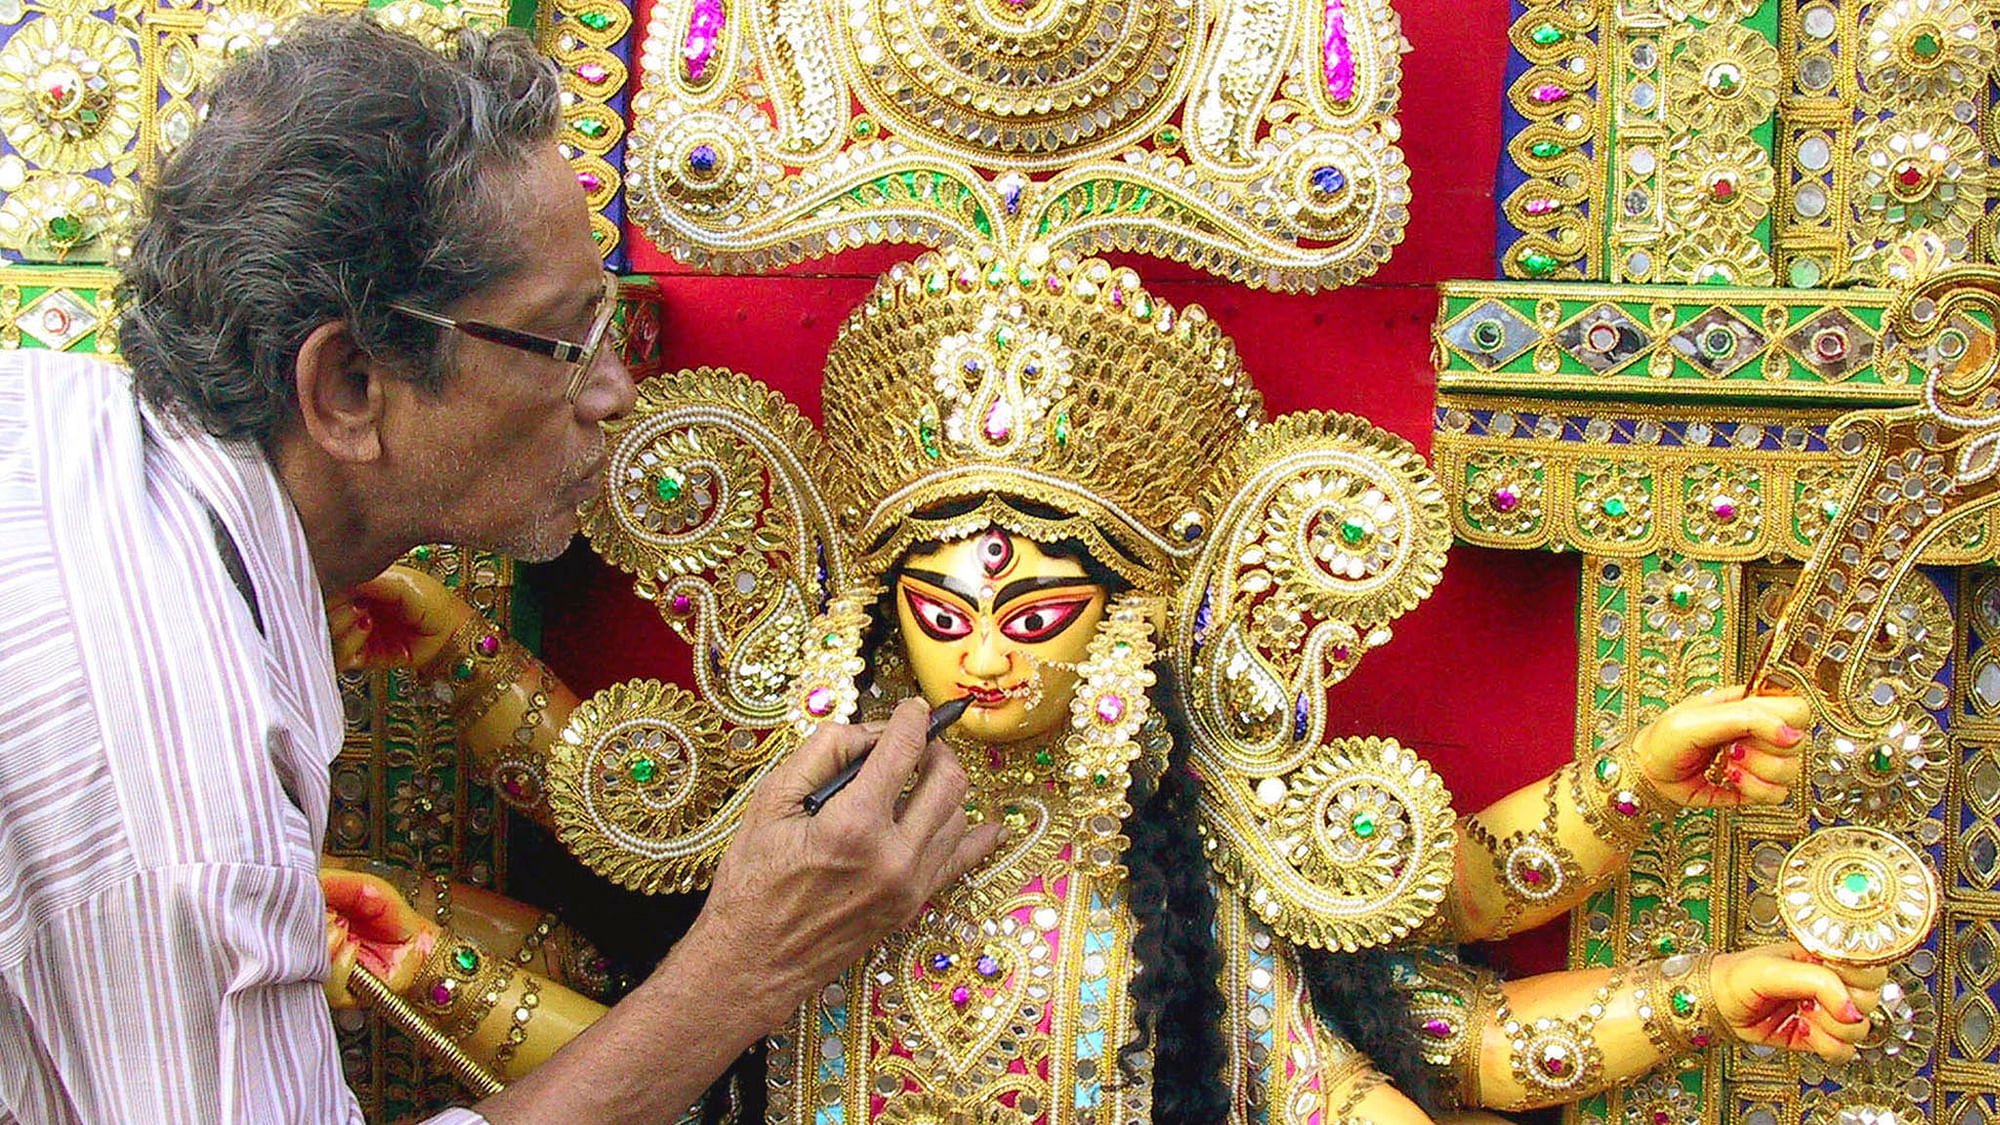 Indian sculptor Amar Nath Ghosh applies the finishing touches to an idol of the Hindu goddess Durga in Calcutta, October 3, 2002. (Photo: Reuters)